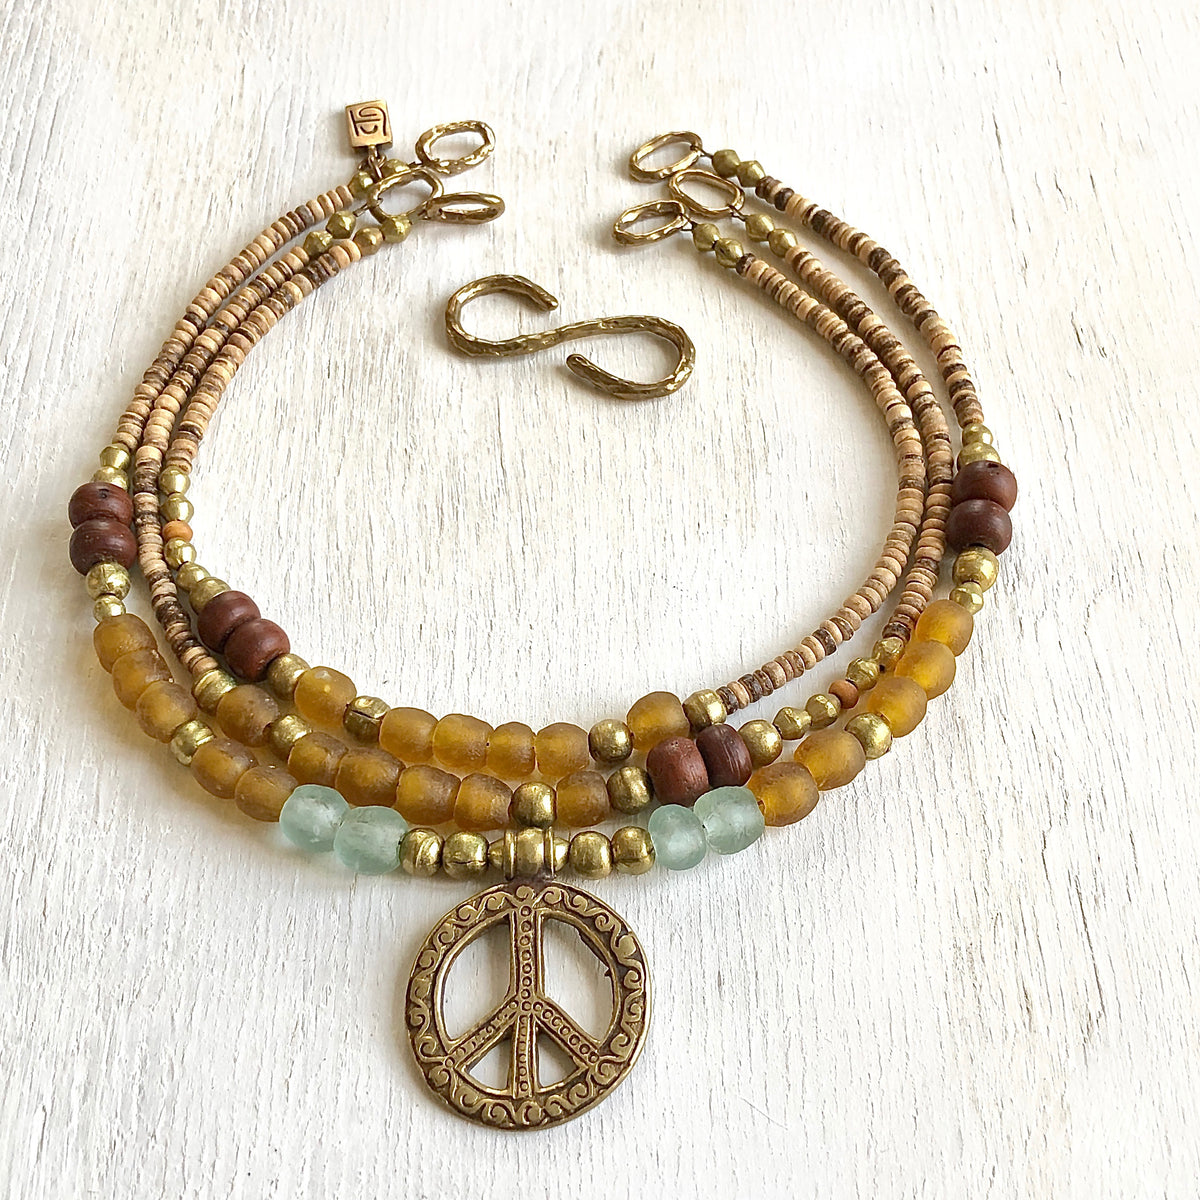 African recycled bottle beads peace necklace. Cristina Tamames Jewelry designer